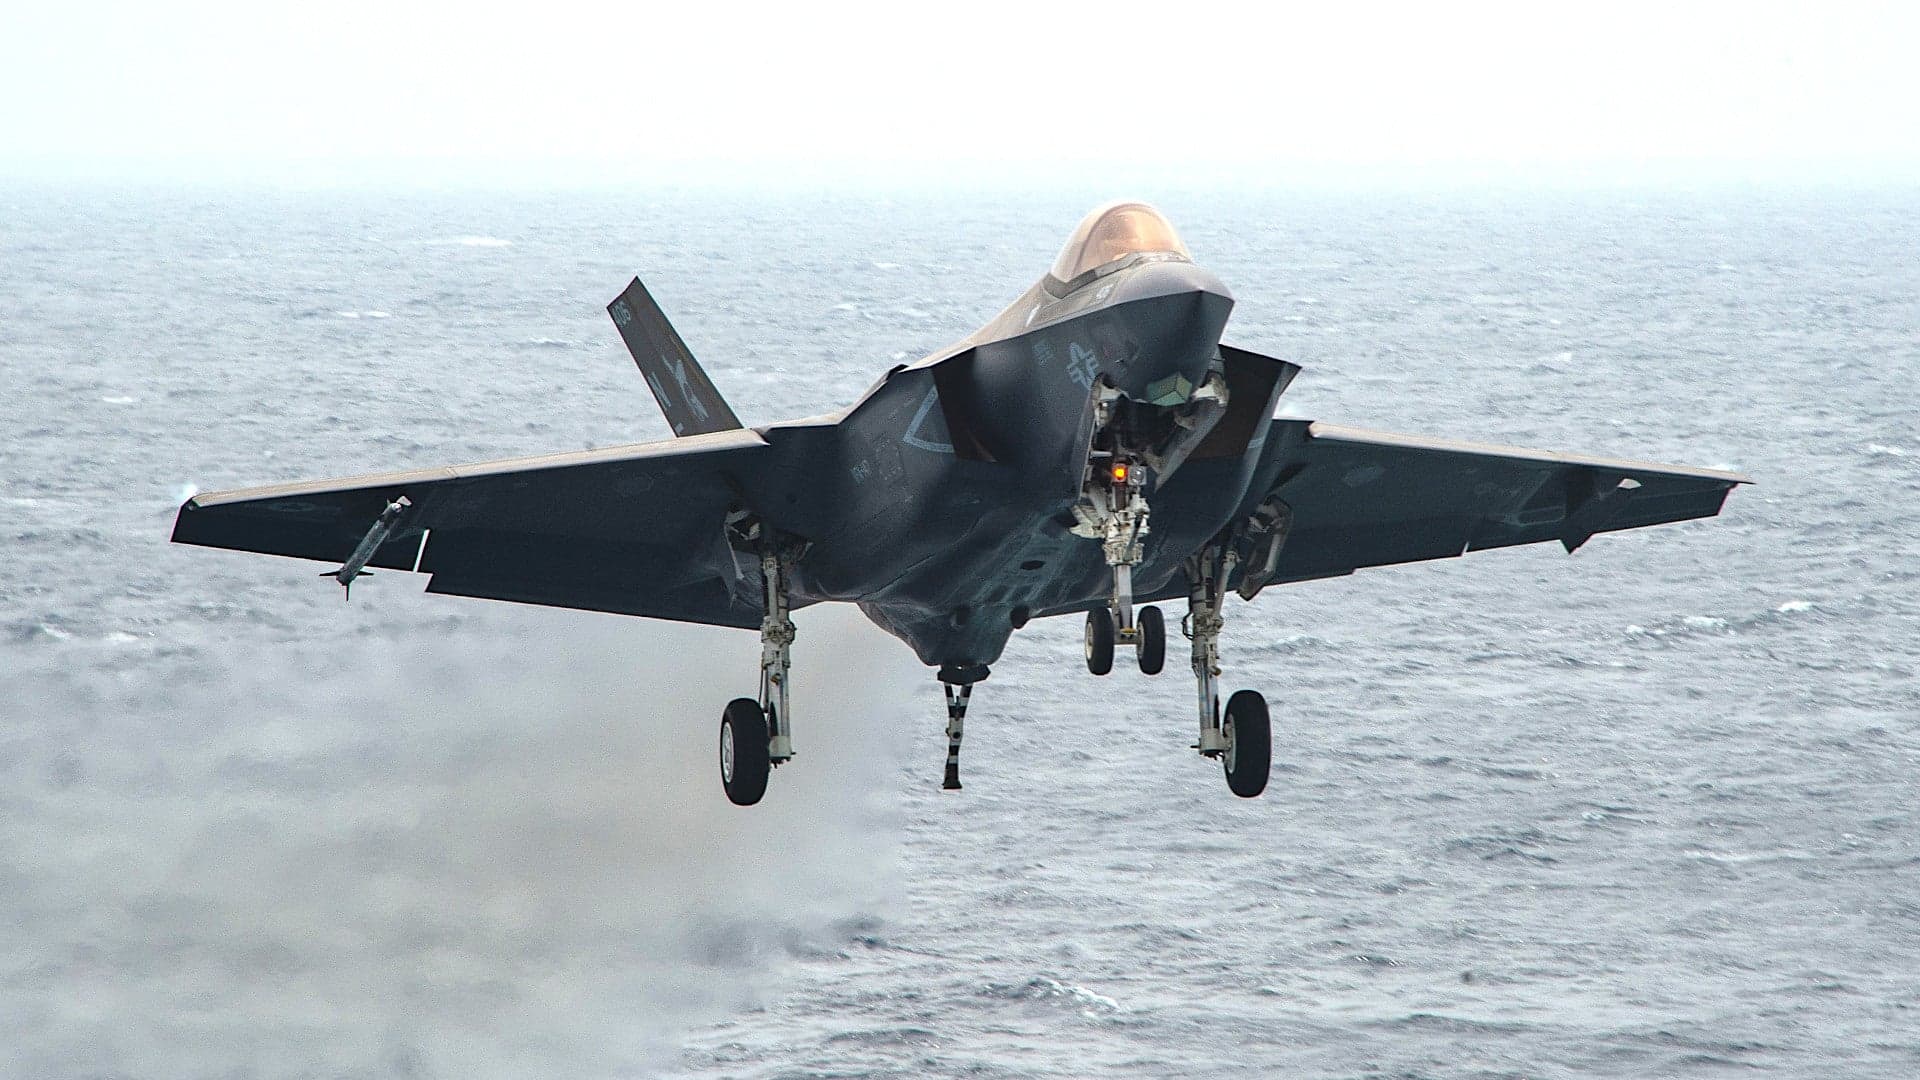 F-35C Accident Aboard Carrier In South China Sea Forces Pilot To Eject, Injures Seven Sailors (Updated)